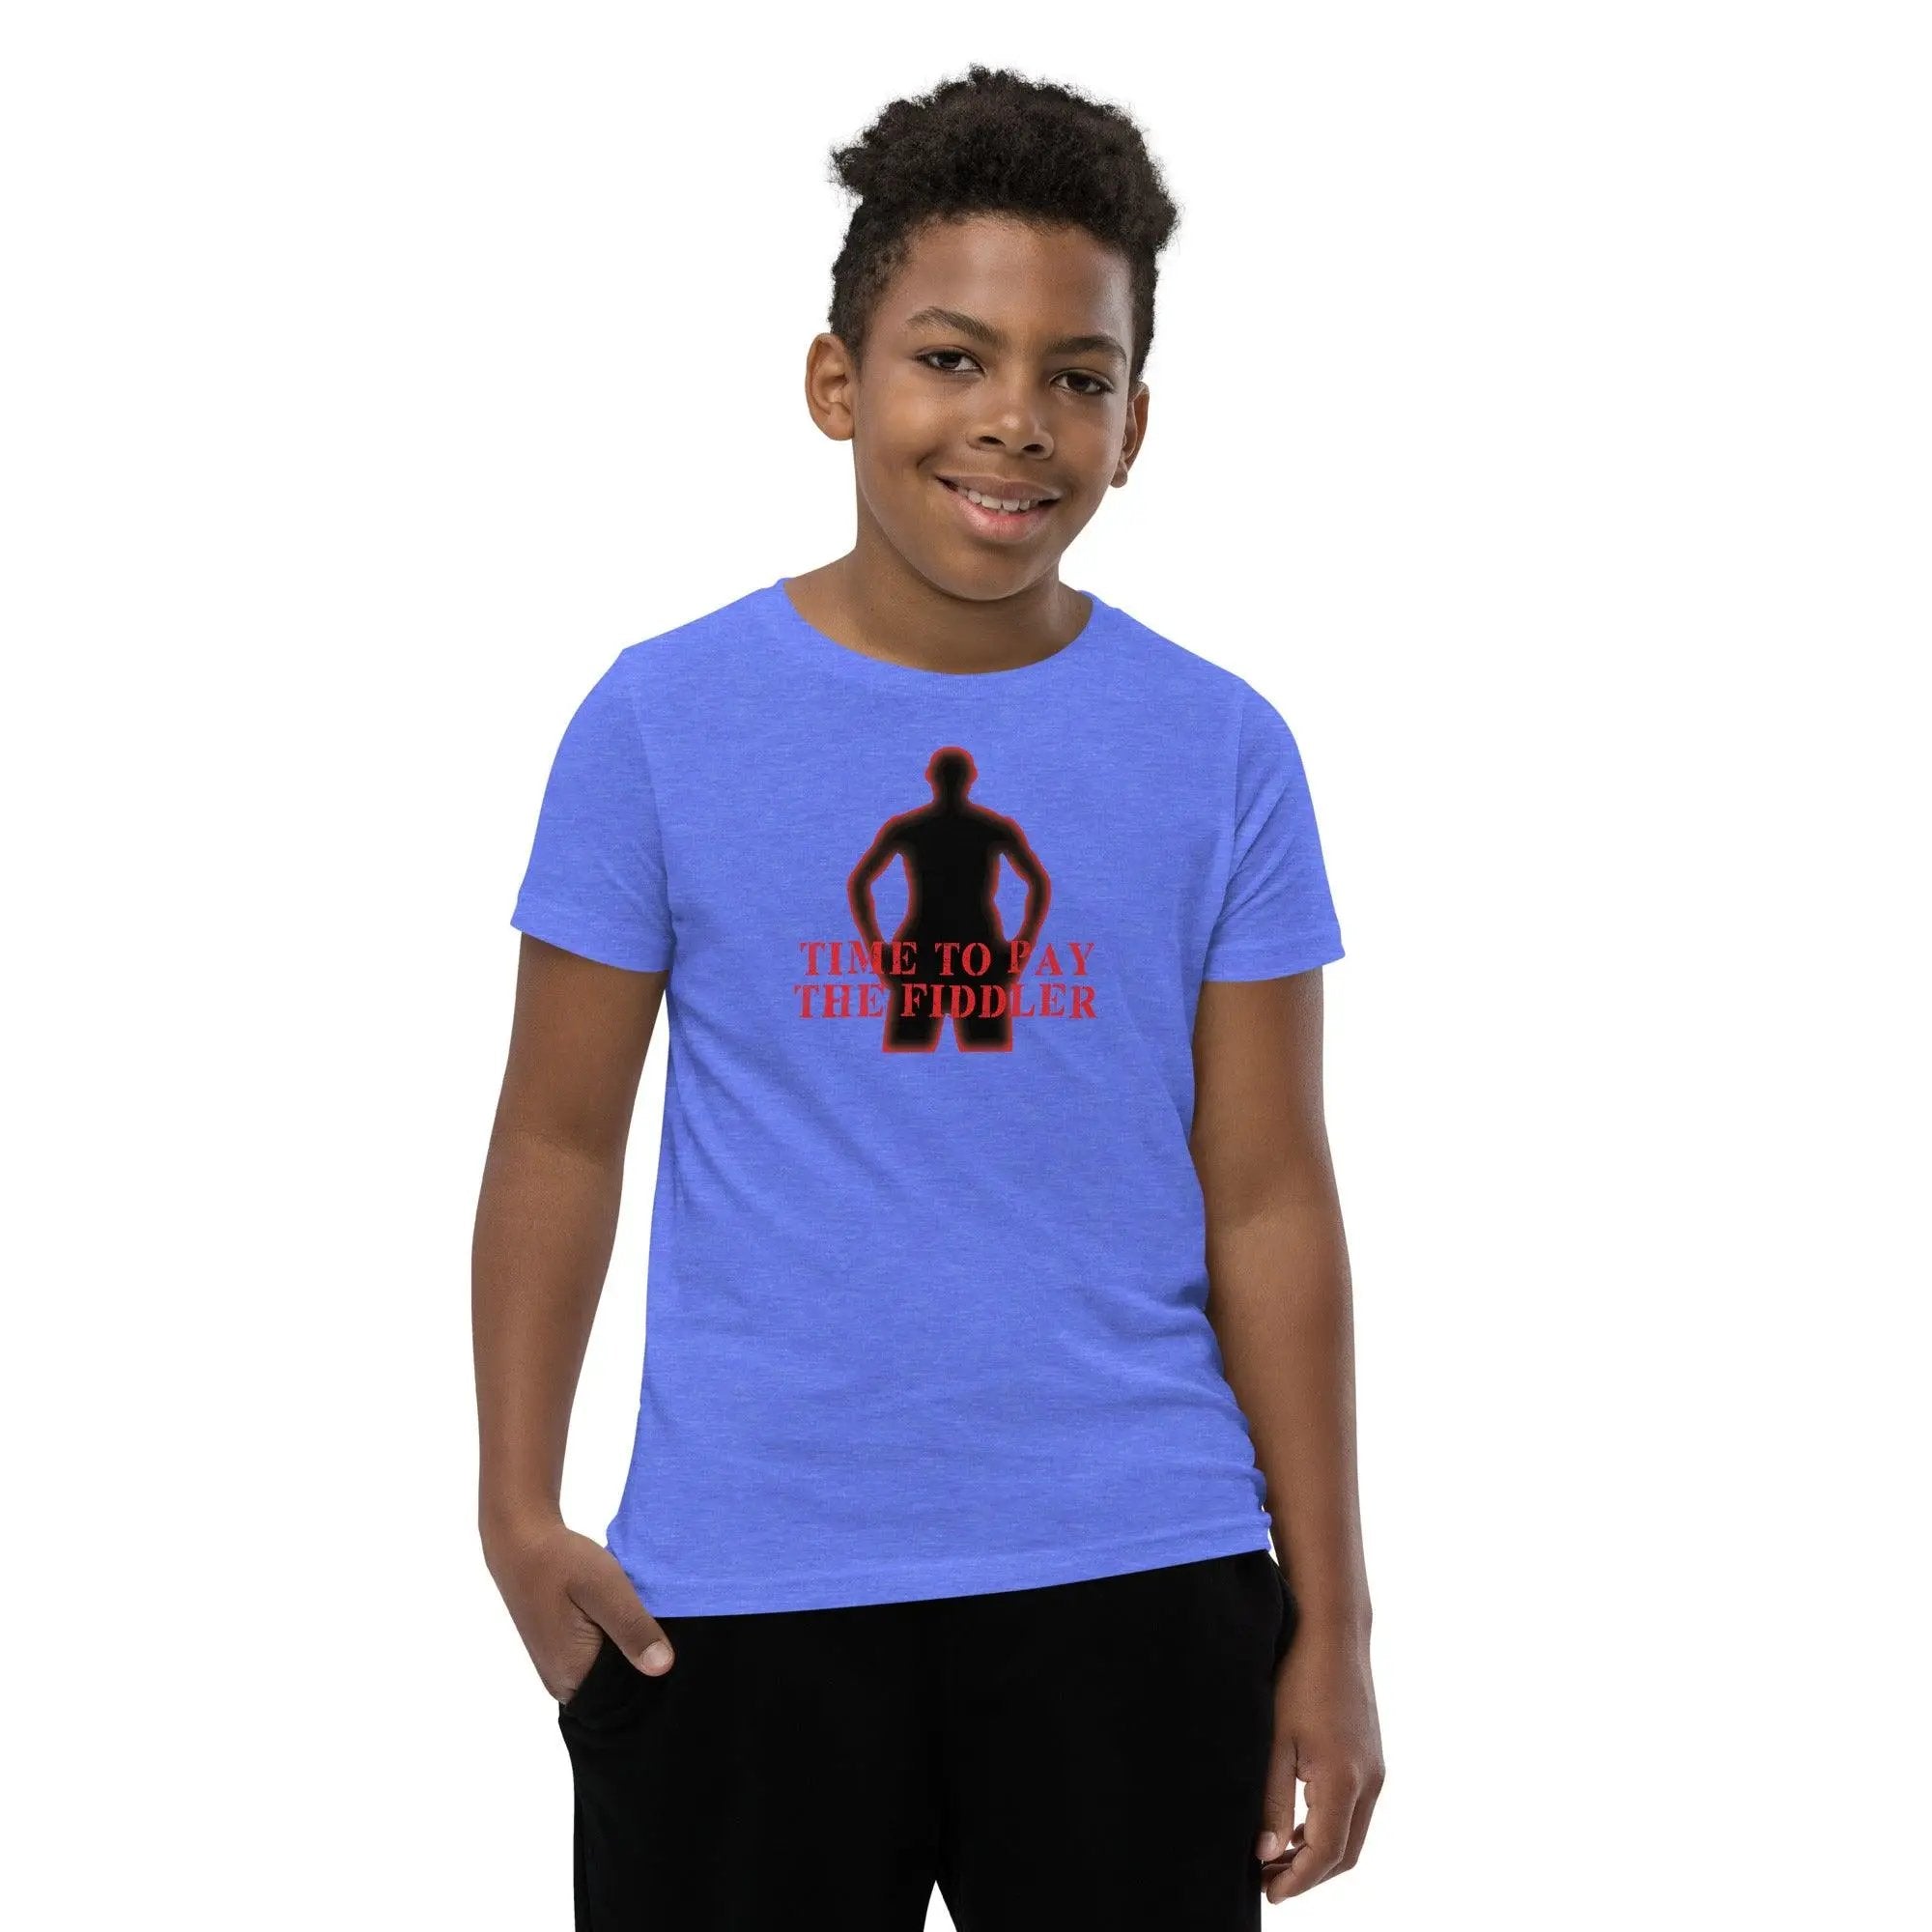 Time To Pay The Fiddler Youth Short Sleeve T-Shirt